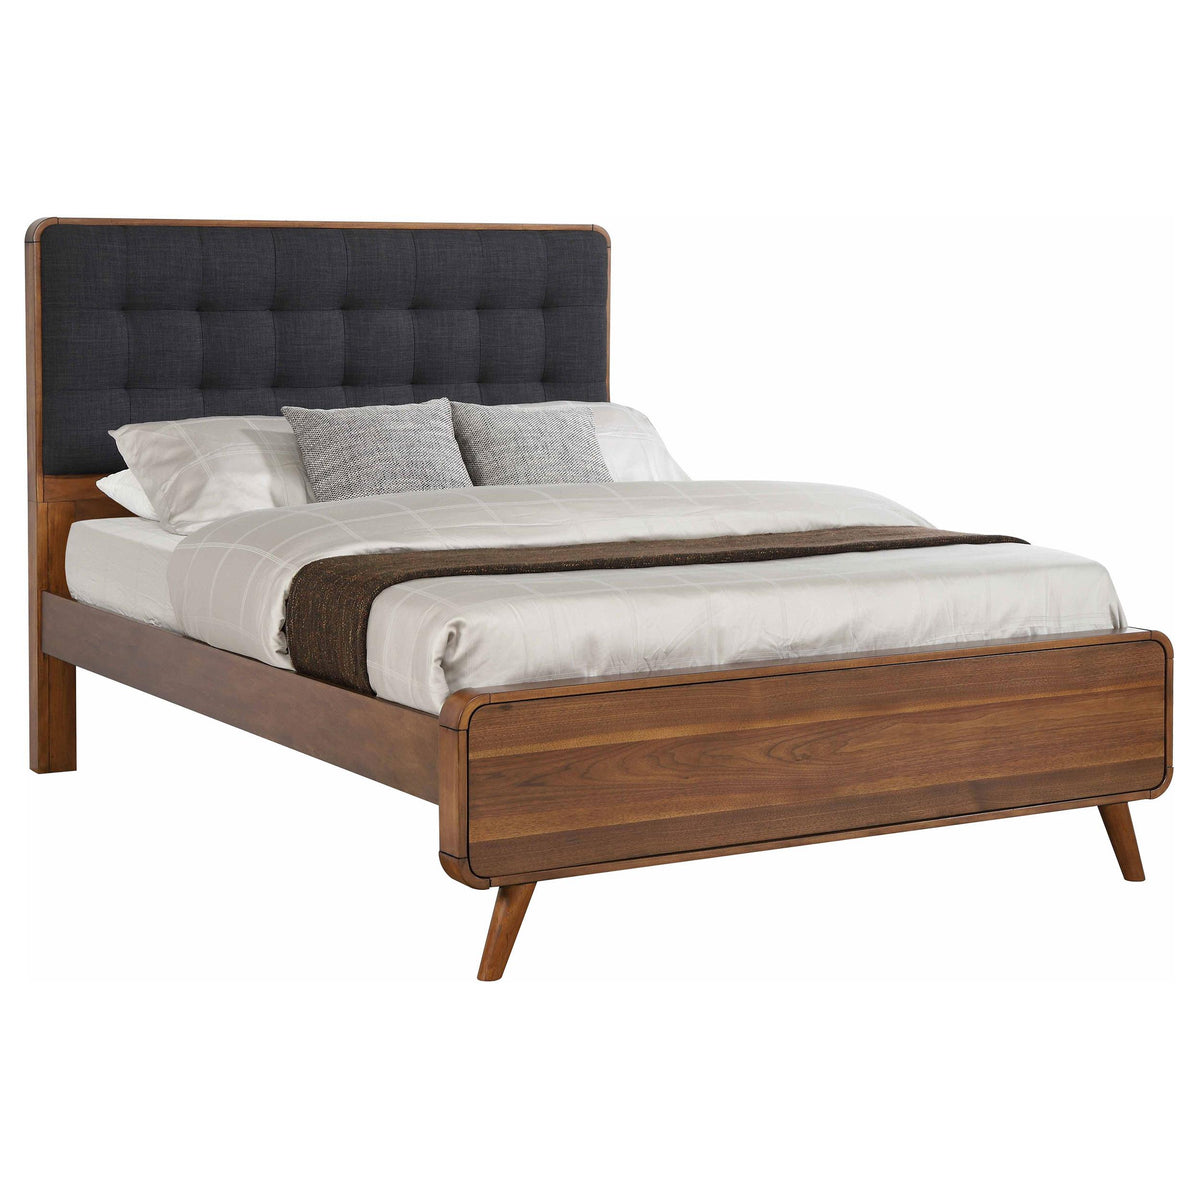 Robyn Queen Bed with Upholstered Headboard Dark Walnut  Las Vegas Furniture Stores